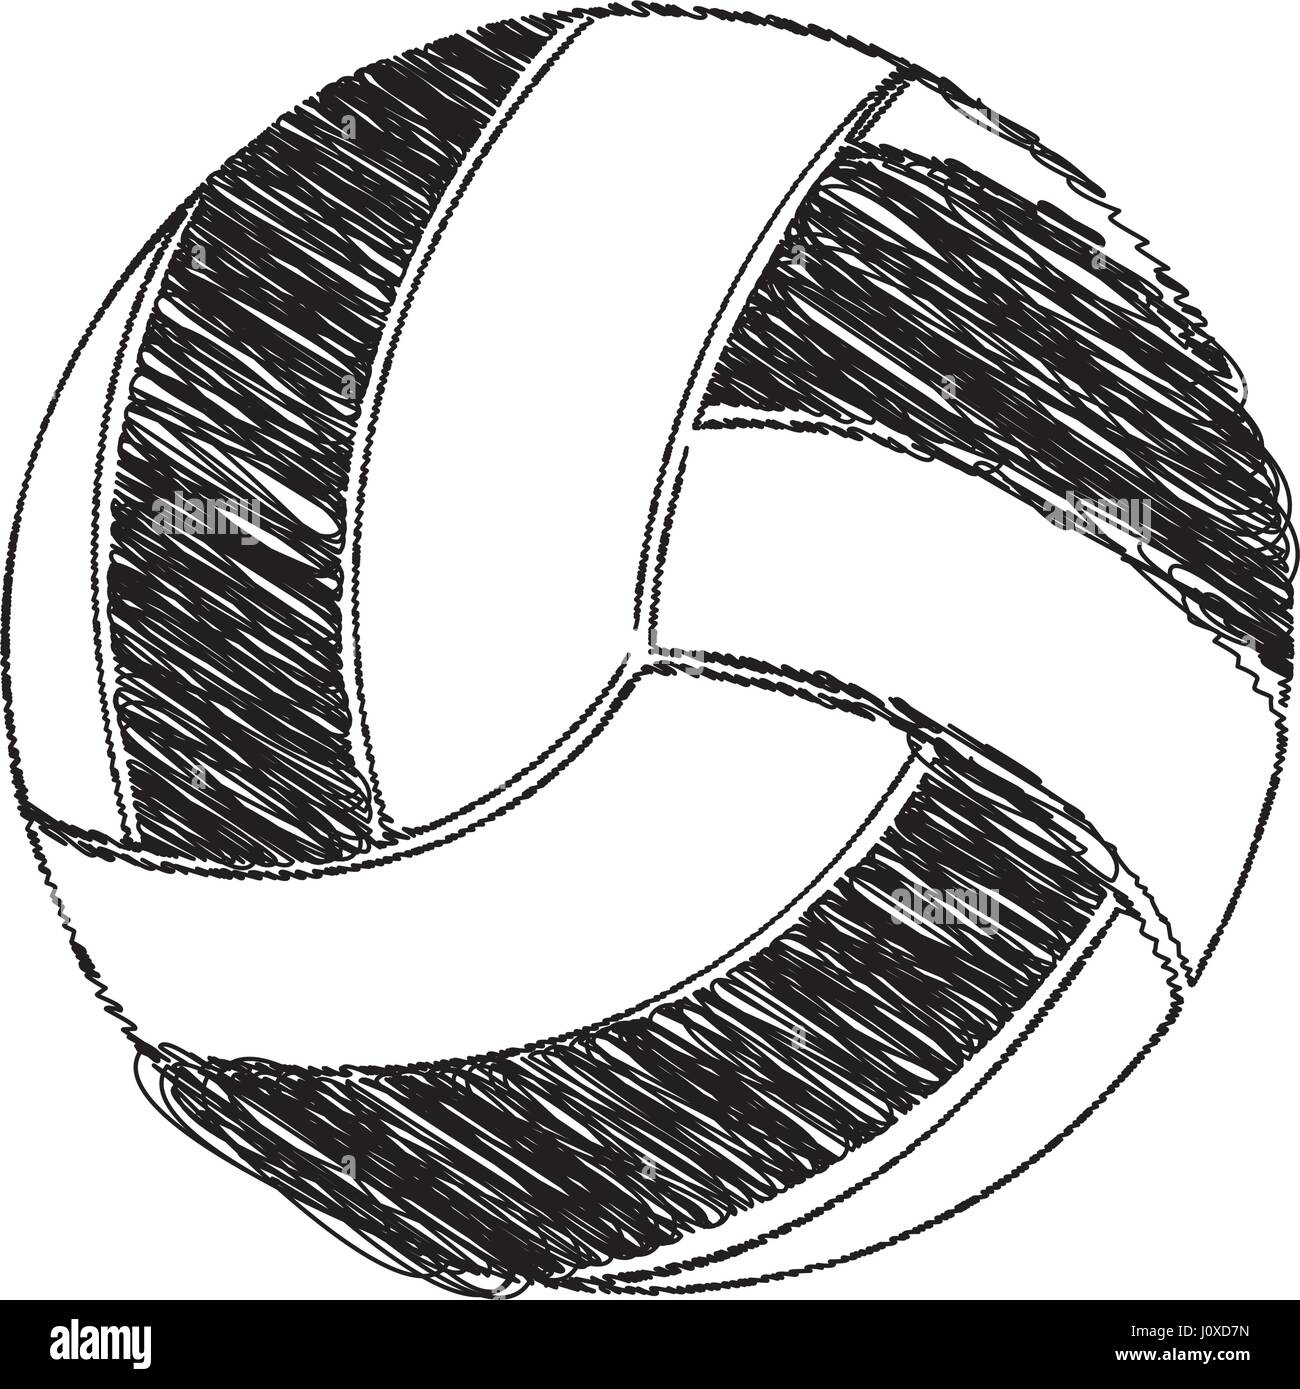 monochrome hand drawn sketch of volleyball ball Stock Vector Image ...